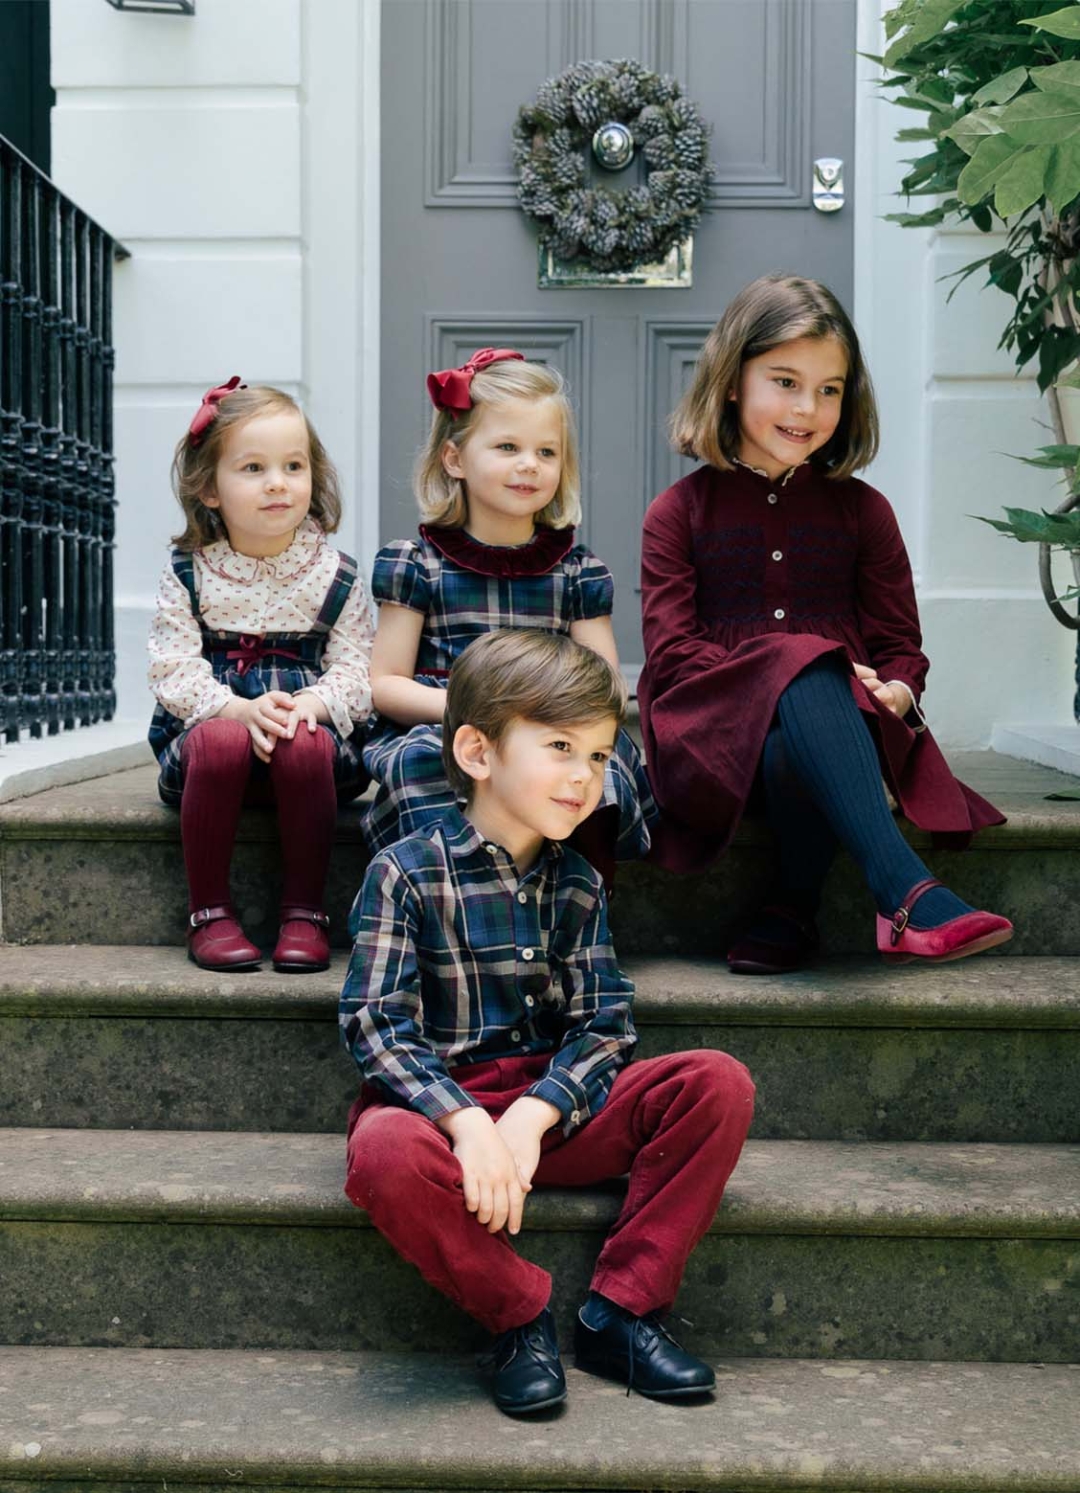 Amaia Kids designs are handcrafted at their workshops in Bilbao, Madrid, and Andalusia